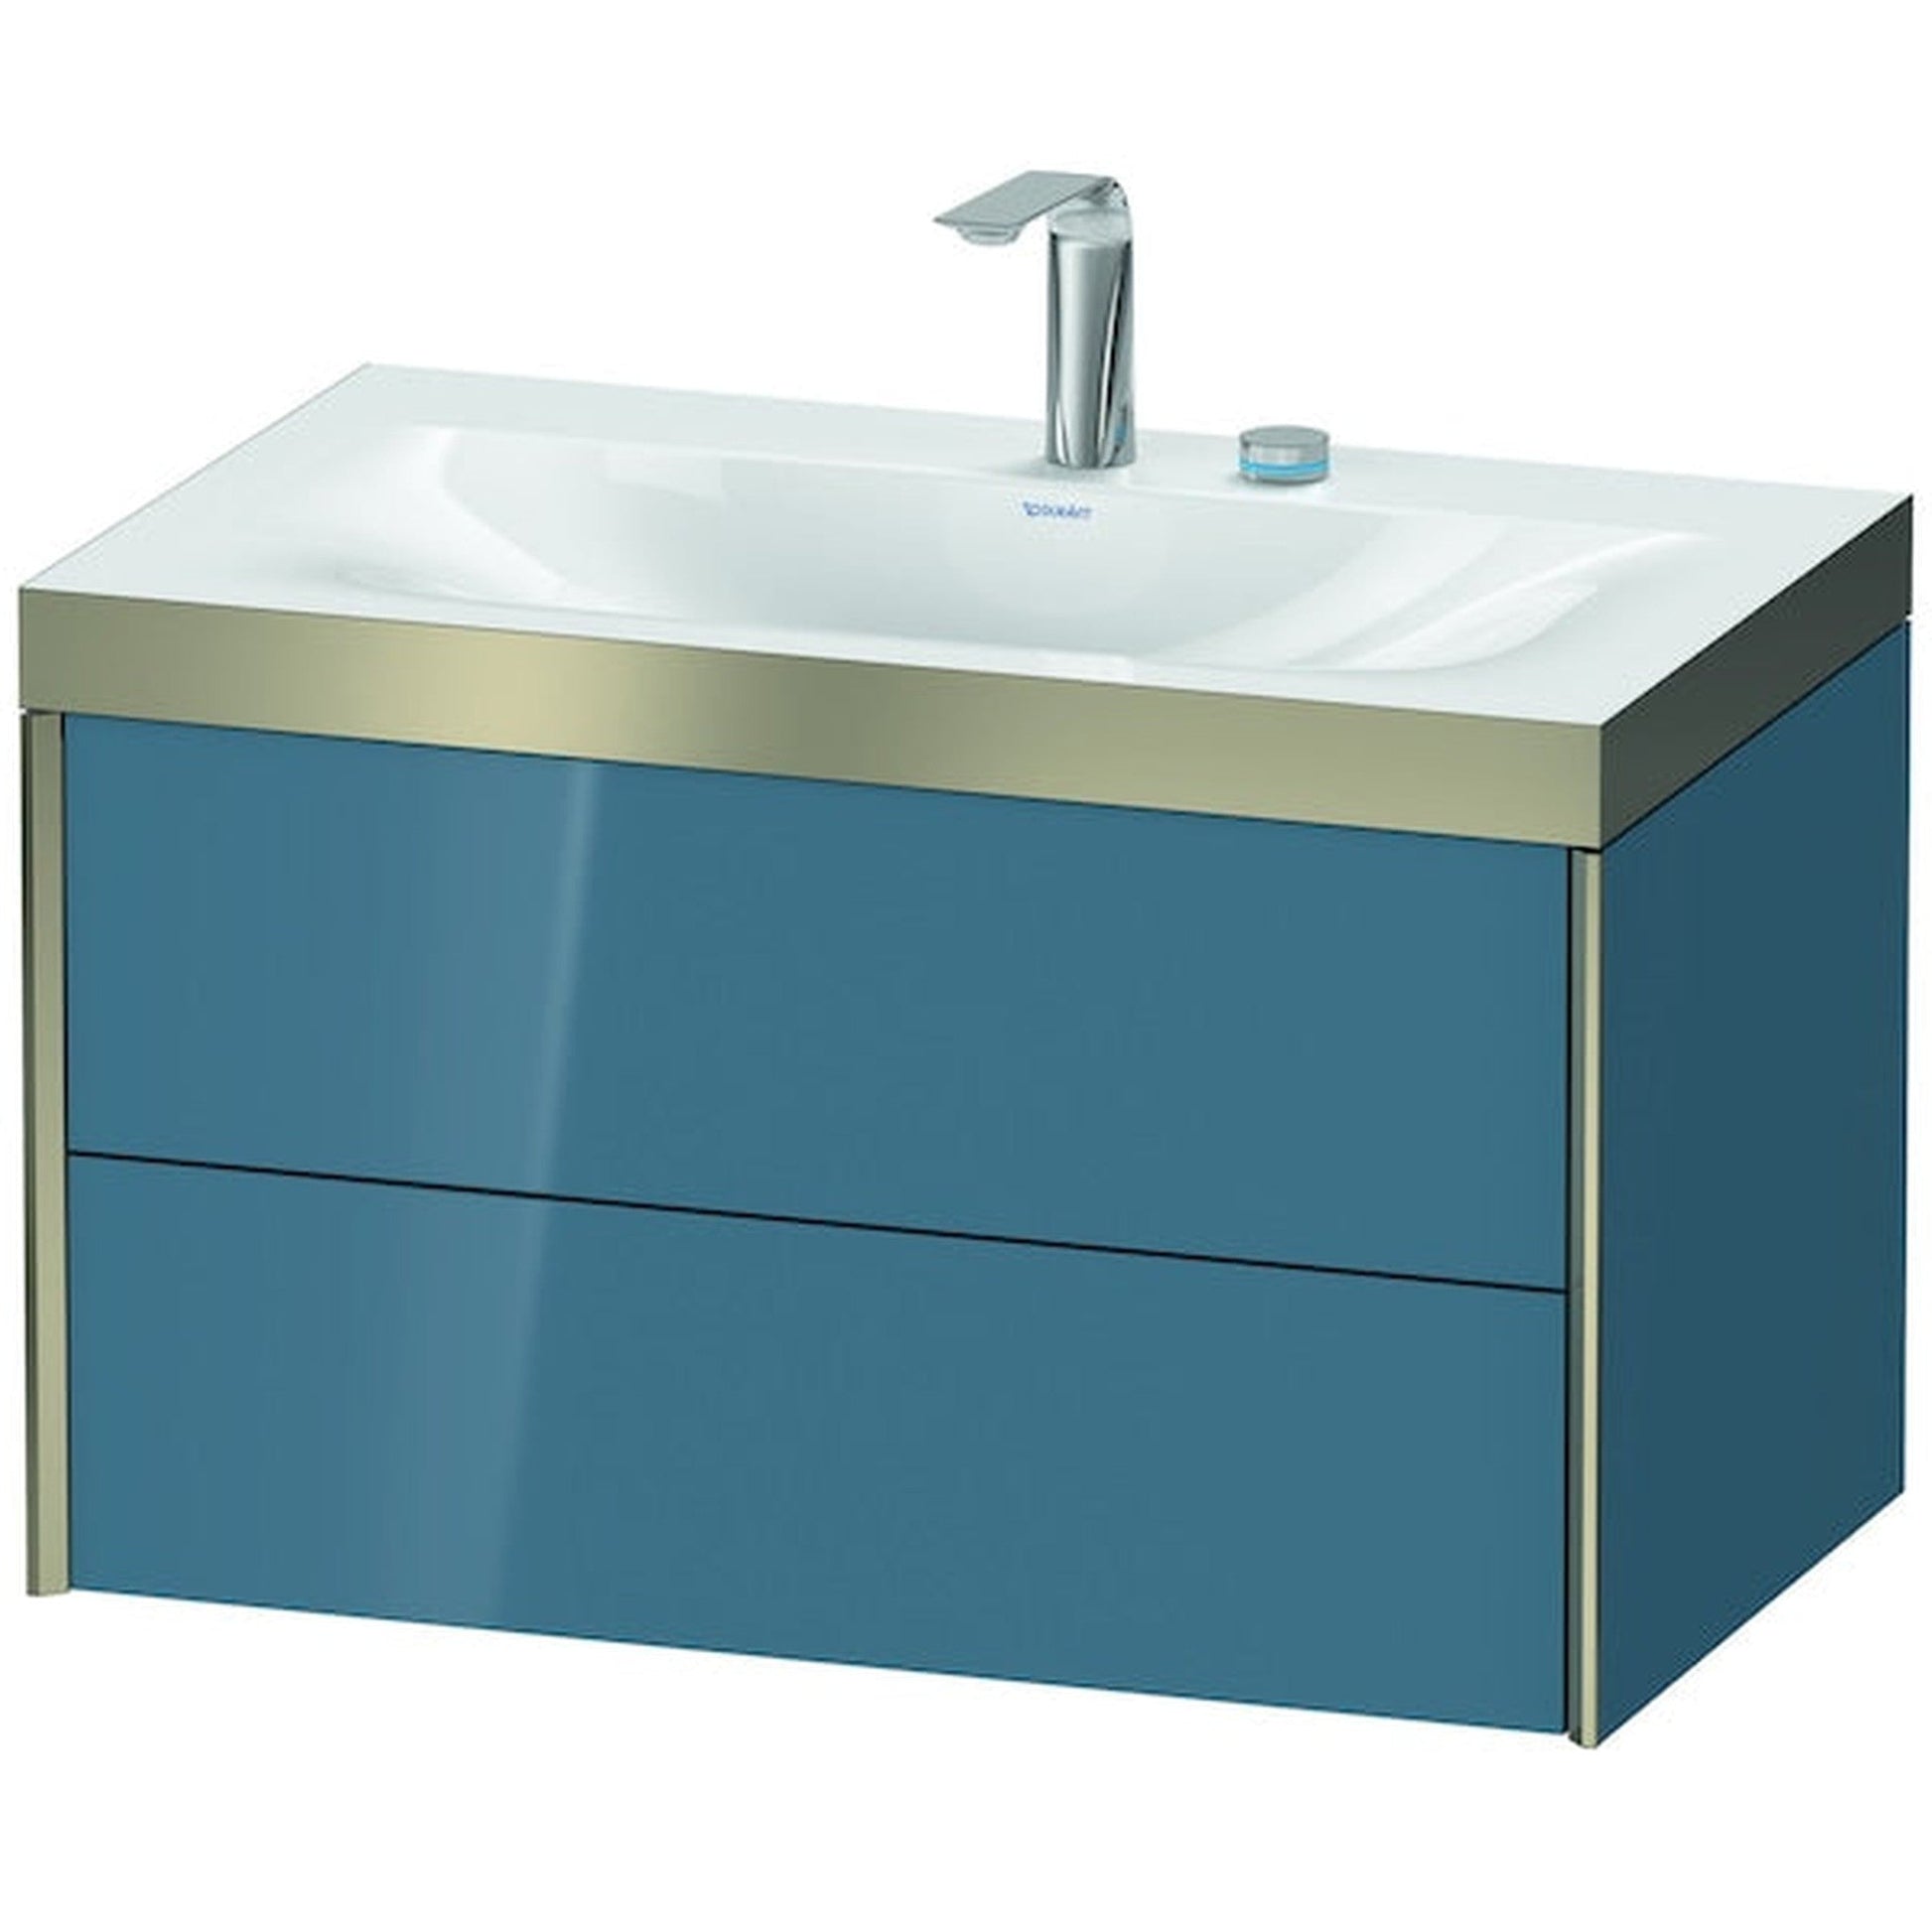 Duravit Xviu 31" x 20" x 19" Two Drawer C-Bonded Wall-Mount Vanity Kit With Two Tap Holes, Stone Blue (XV4615EB147P)